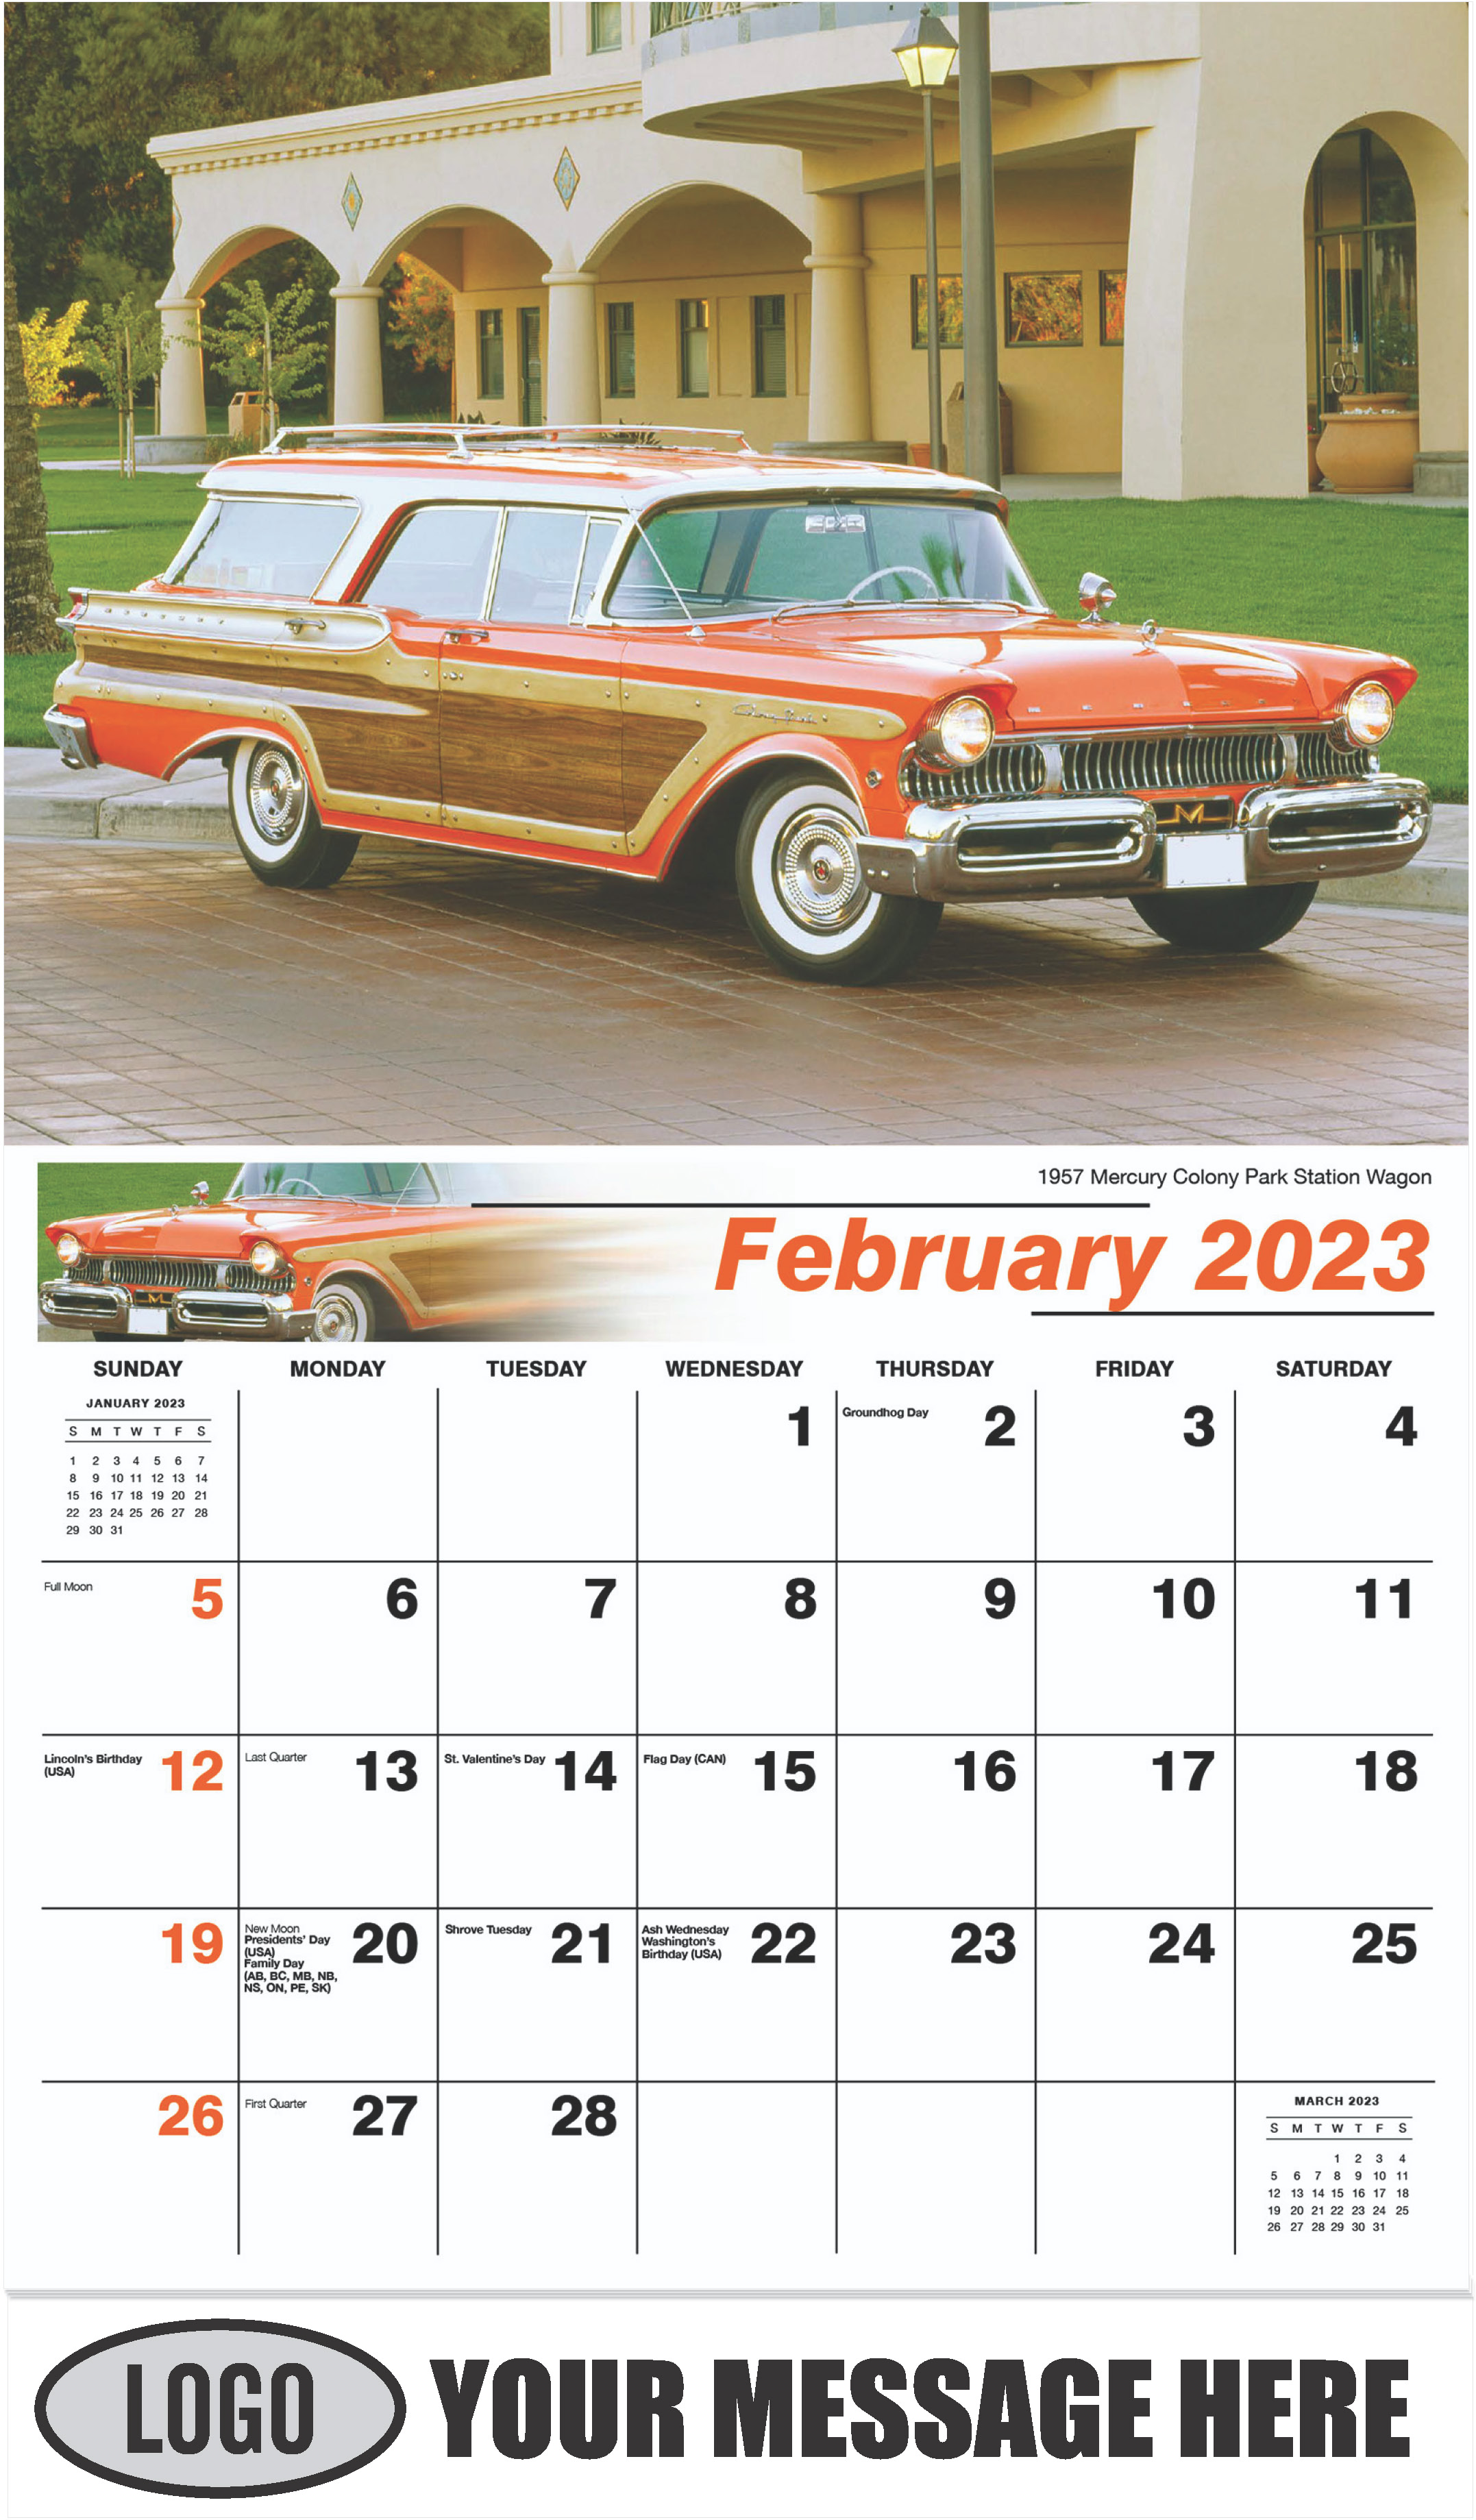 1957 Mercury Colony Park Station Wagon - February - Henry's Heritage Ford Cars 2023 Promotional Calendar